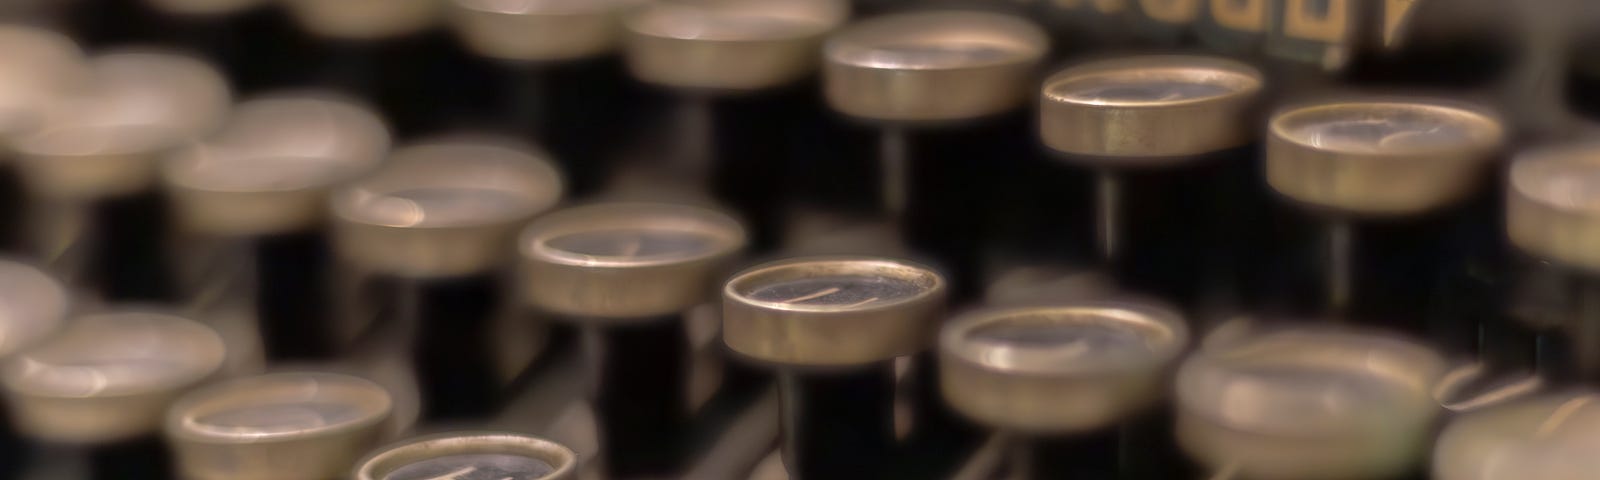 An antique typewriter close up to show the keys